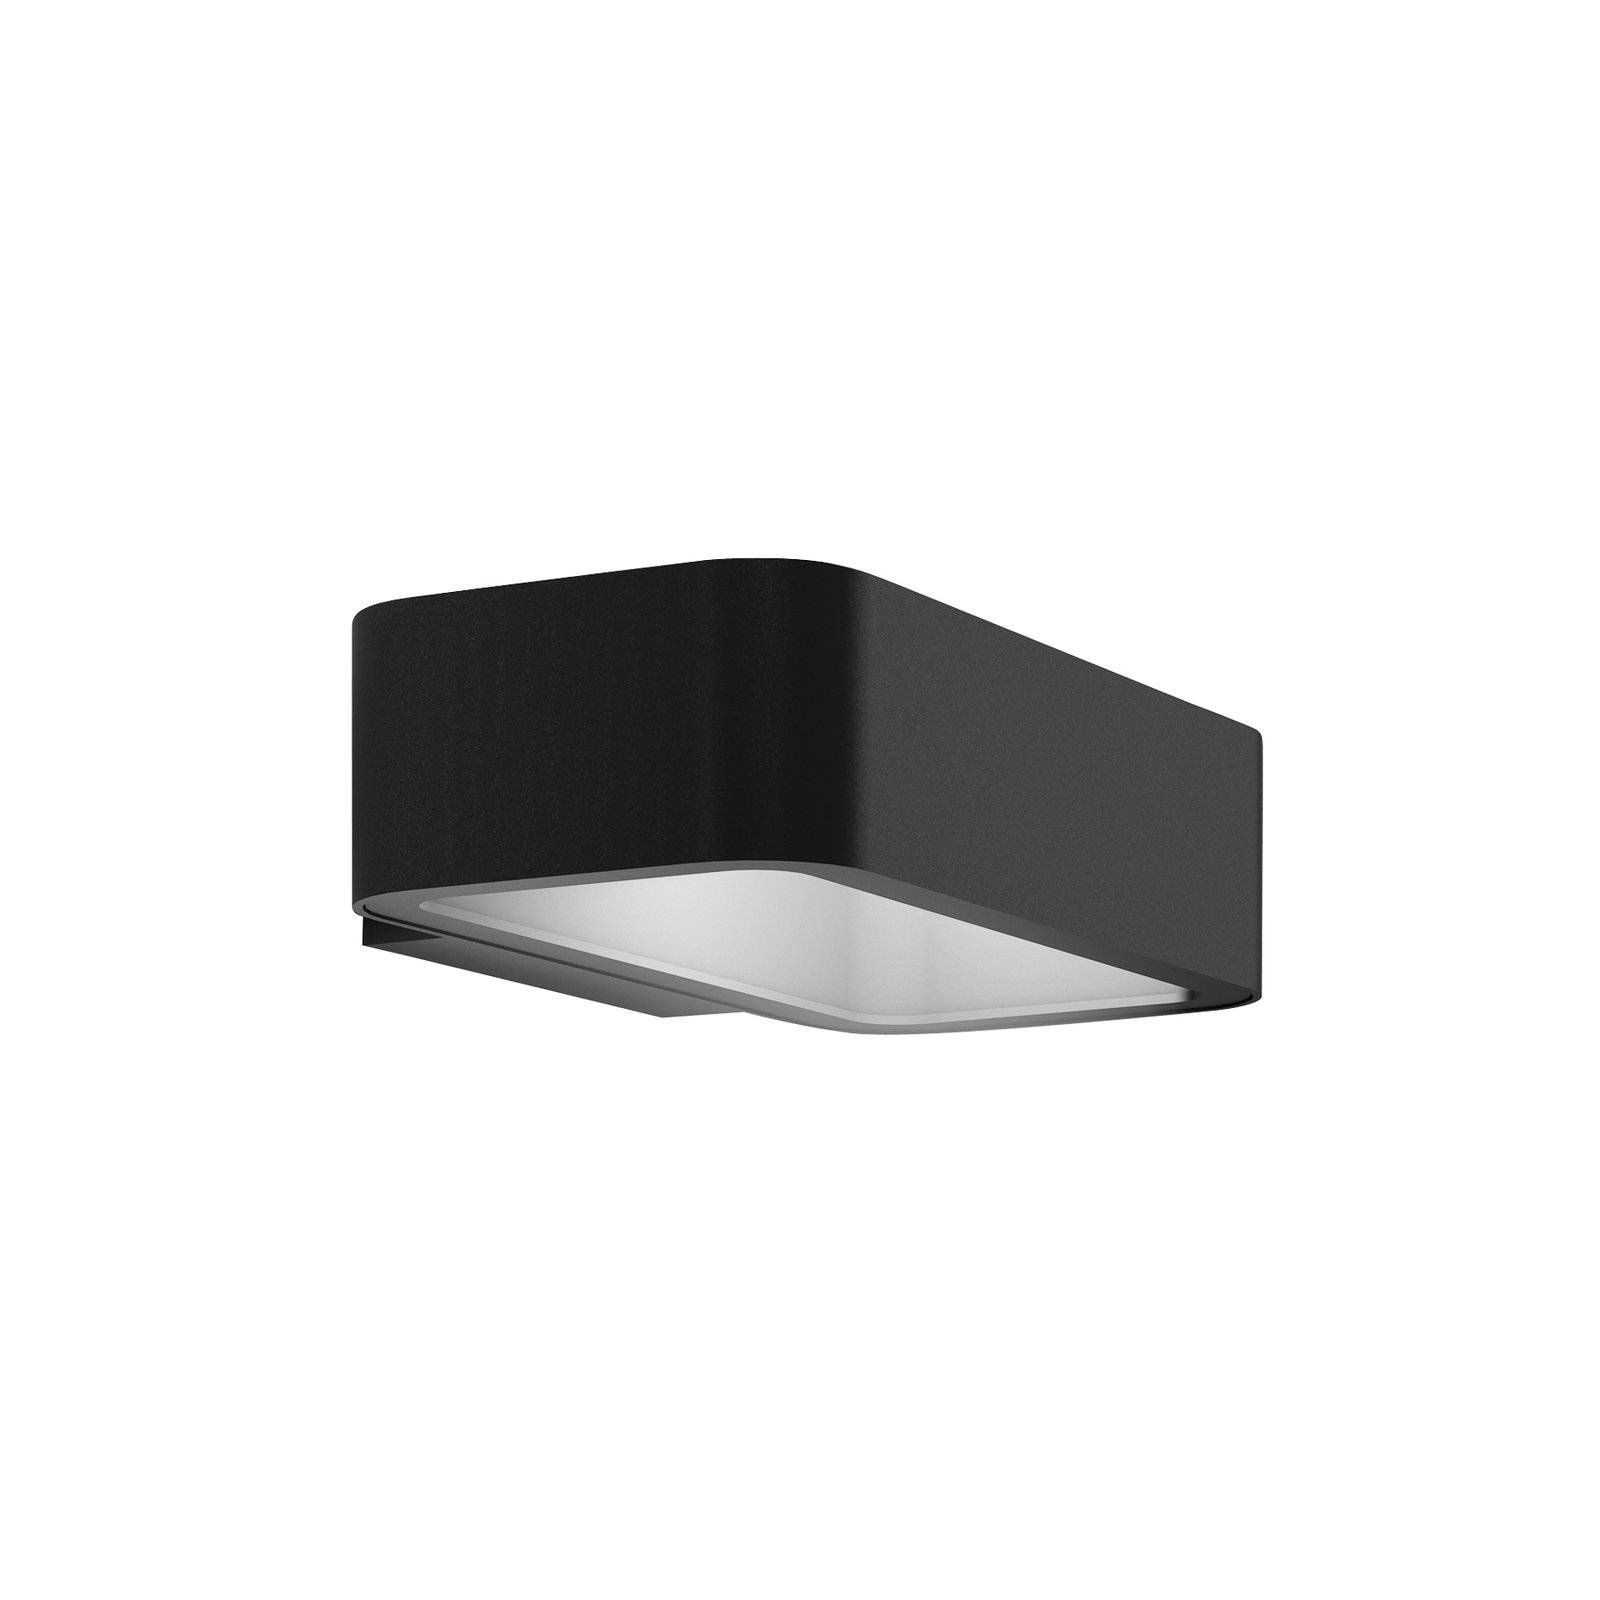 RZB HB 103 LED outdoor wall light indirect up/down